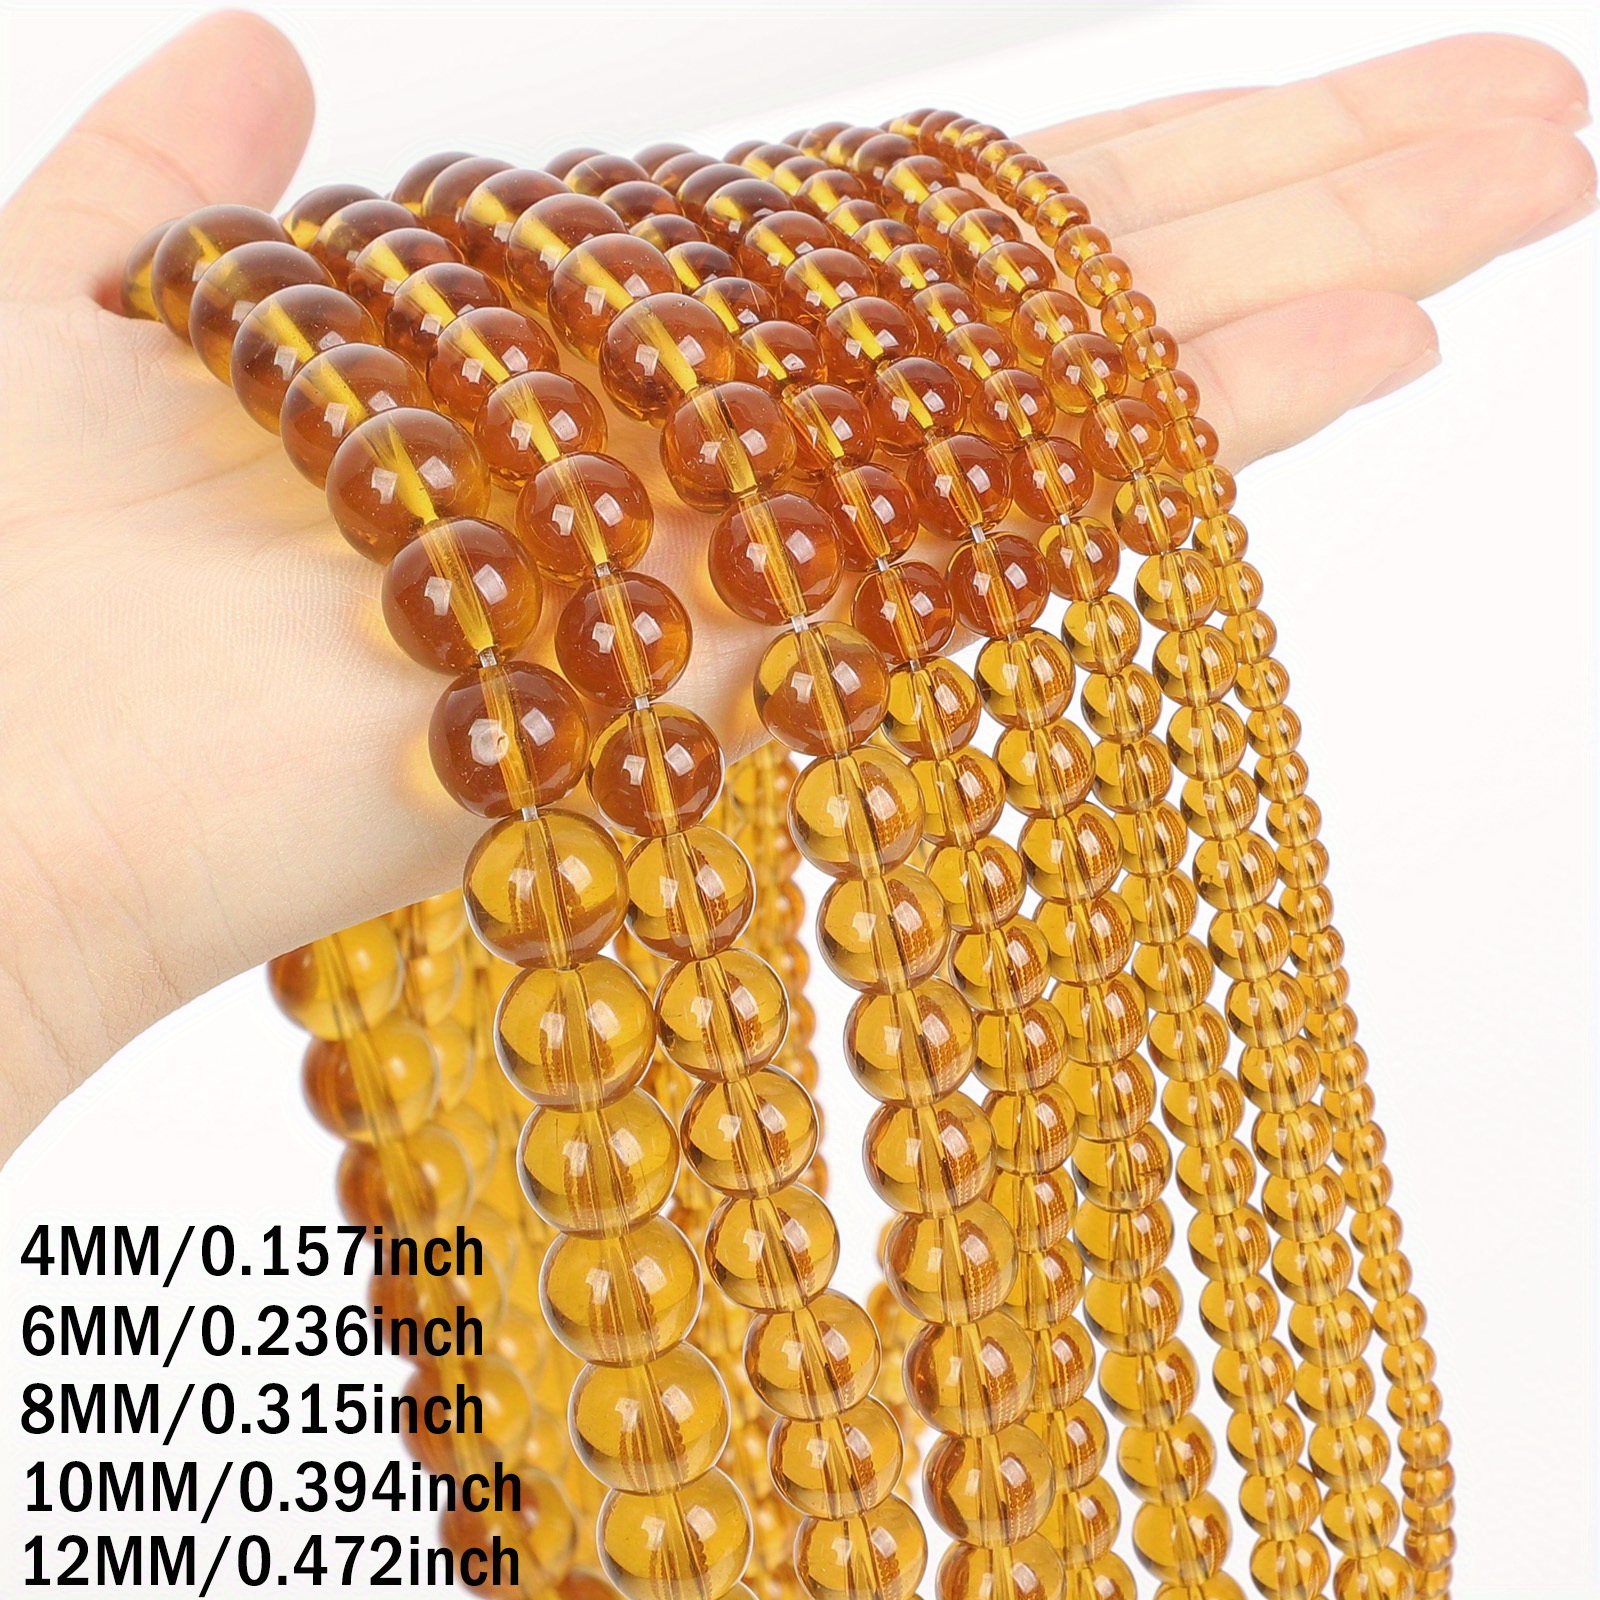 4mm 6mm 8mm 10mm 12mm Natural Gemstone Beads DIY Jewelry Findings